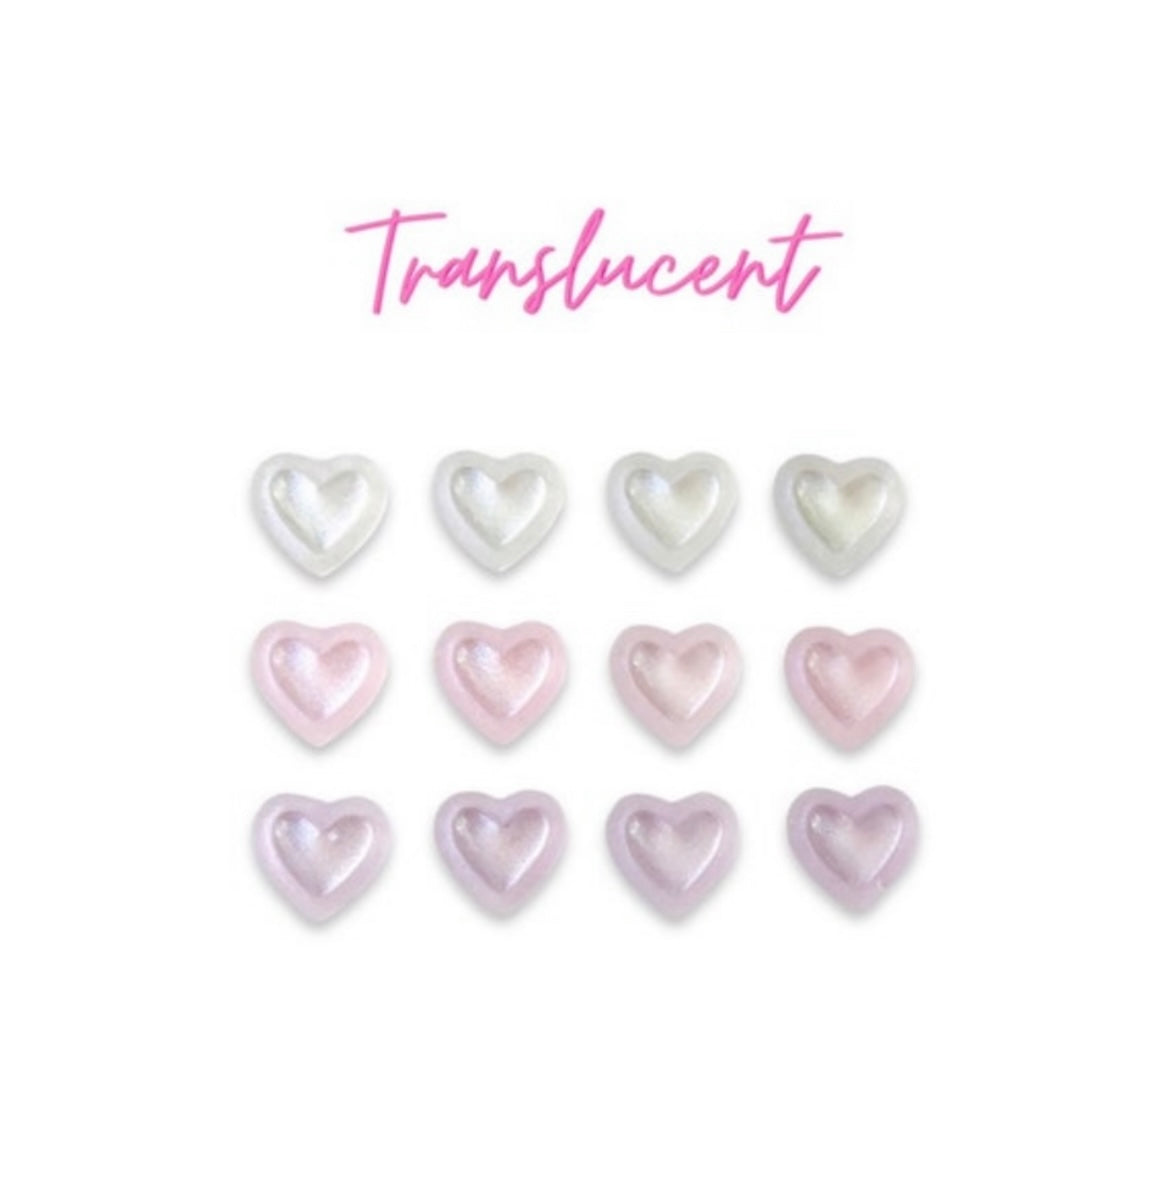 Translucent Hearts - Earrings